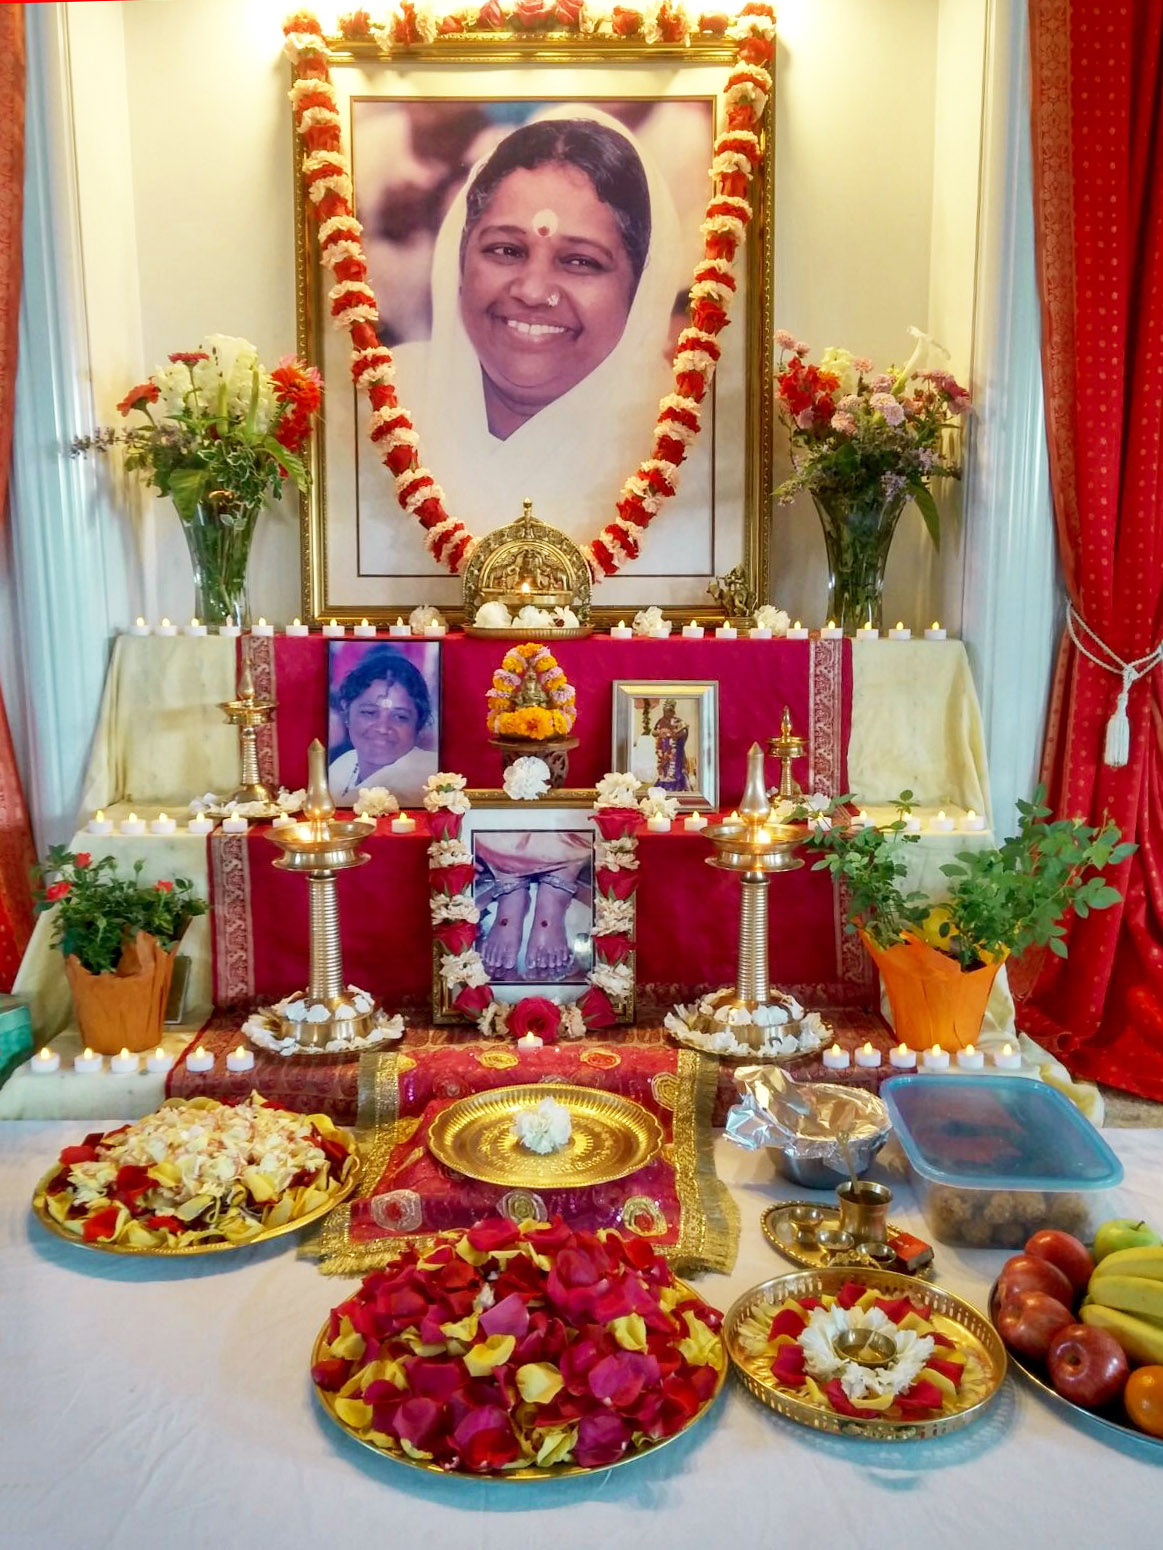 Altar with Amma's portrait, fresh flowers, and many votive candles